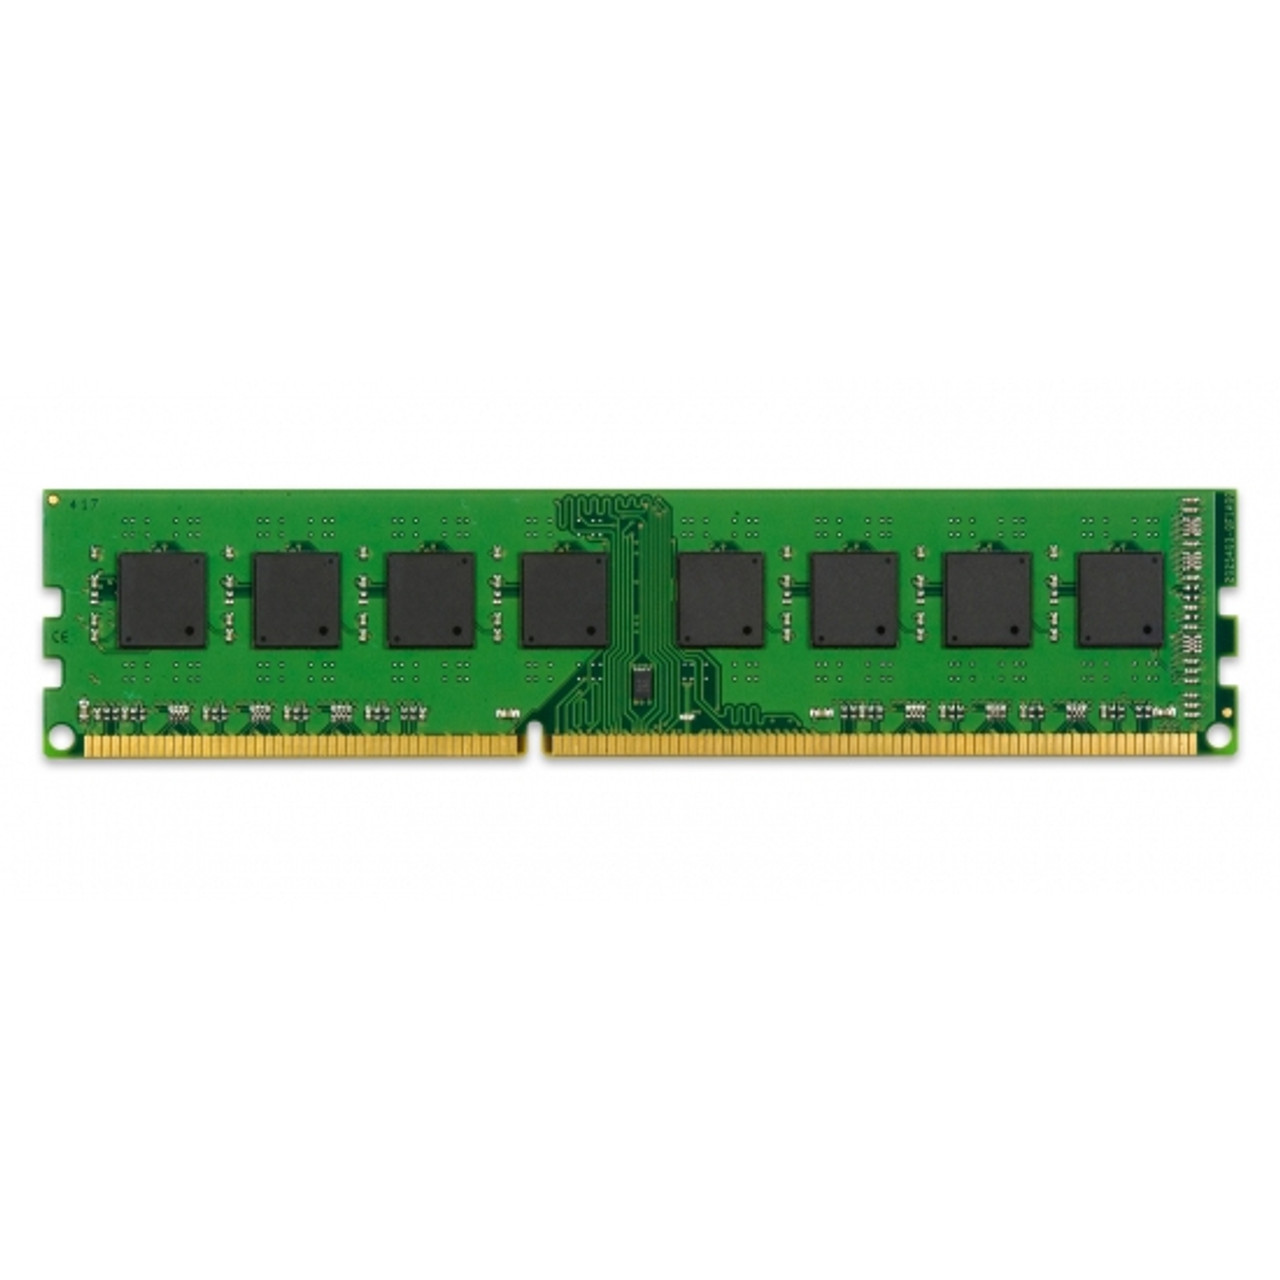 Kingston Technology System Specific Memory 4GB DDR3 1333MHz 4GB DDR3 1333MHz memory module